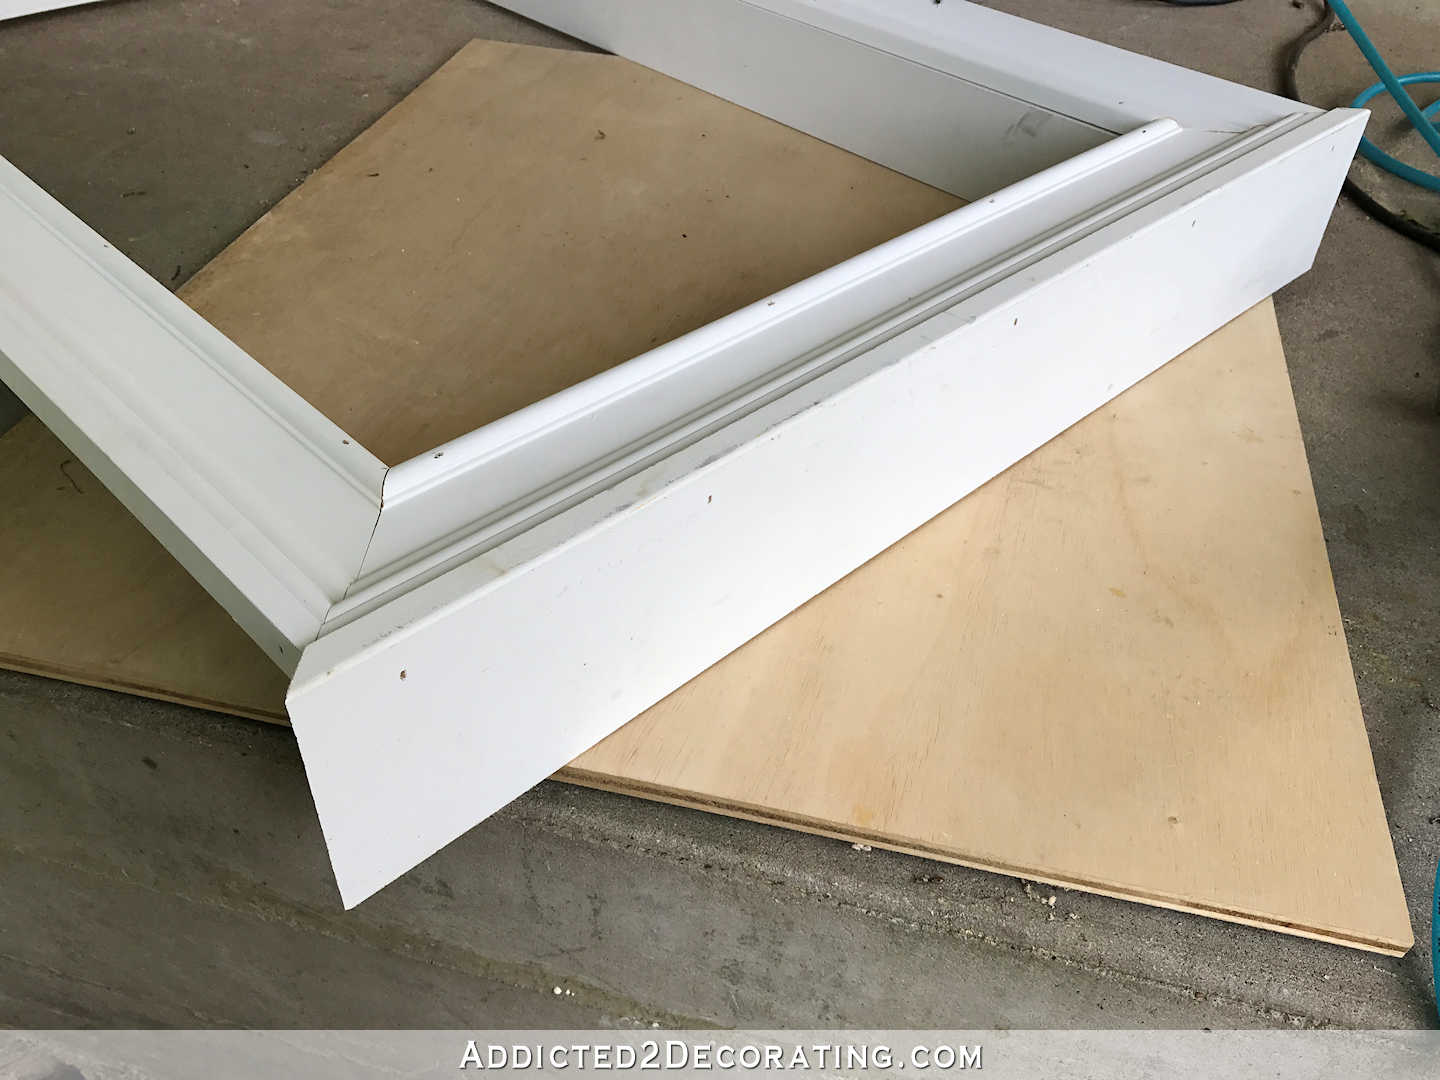 How To Build An Easy DIY Custom Frame For A Wall Mounted TV – Part 1